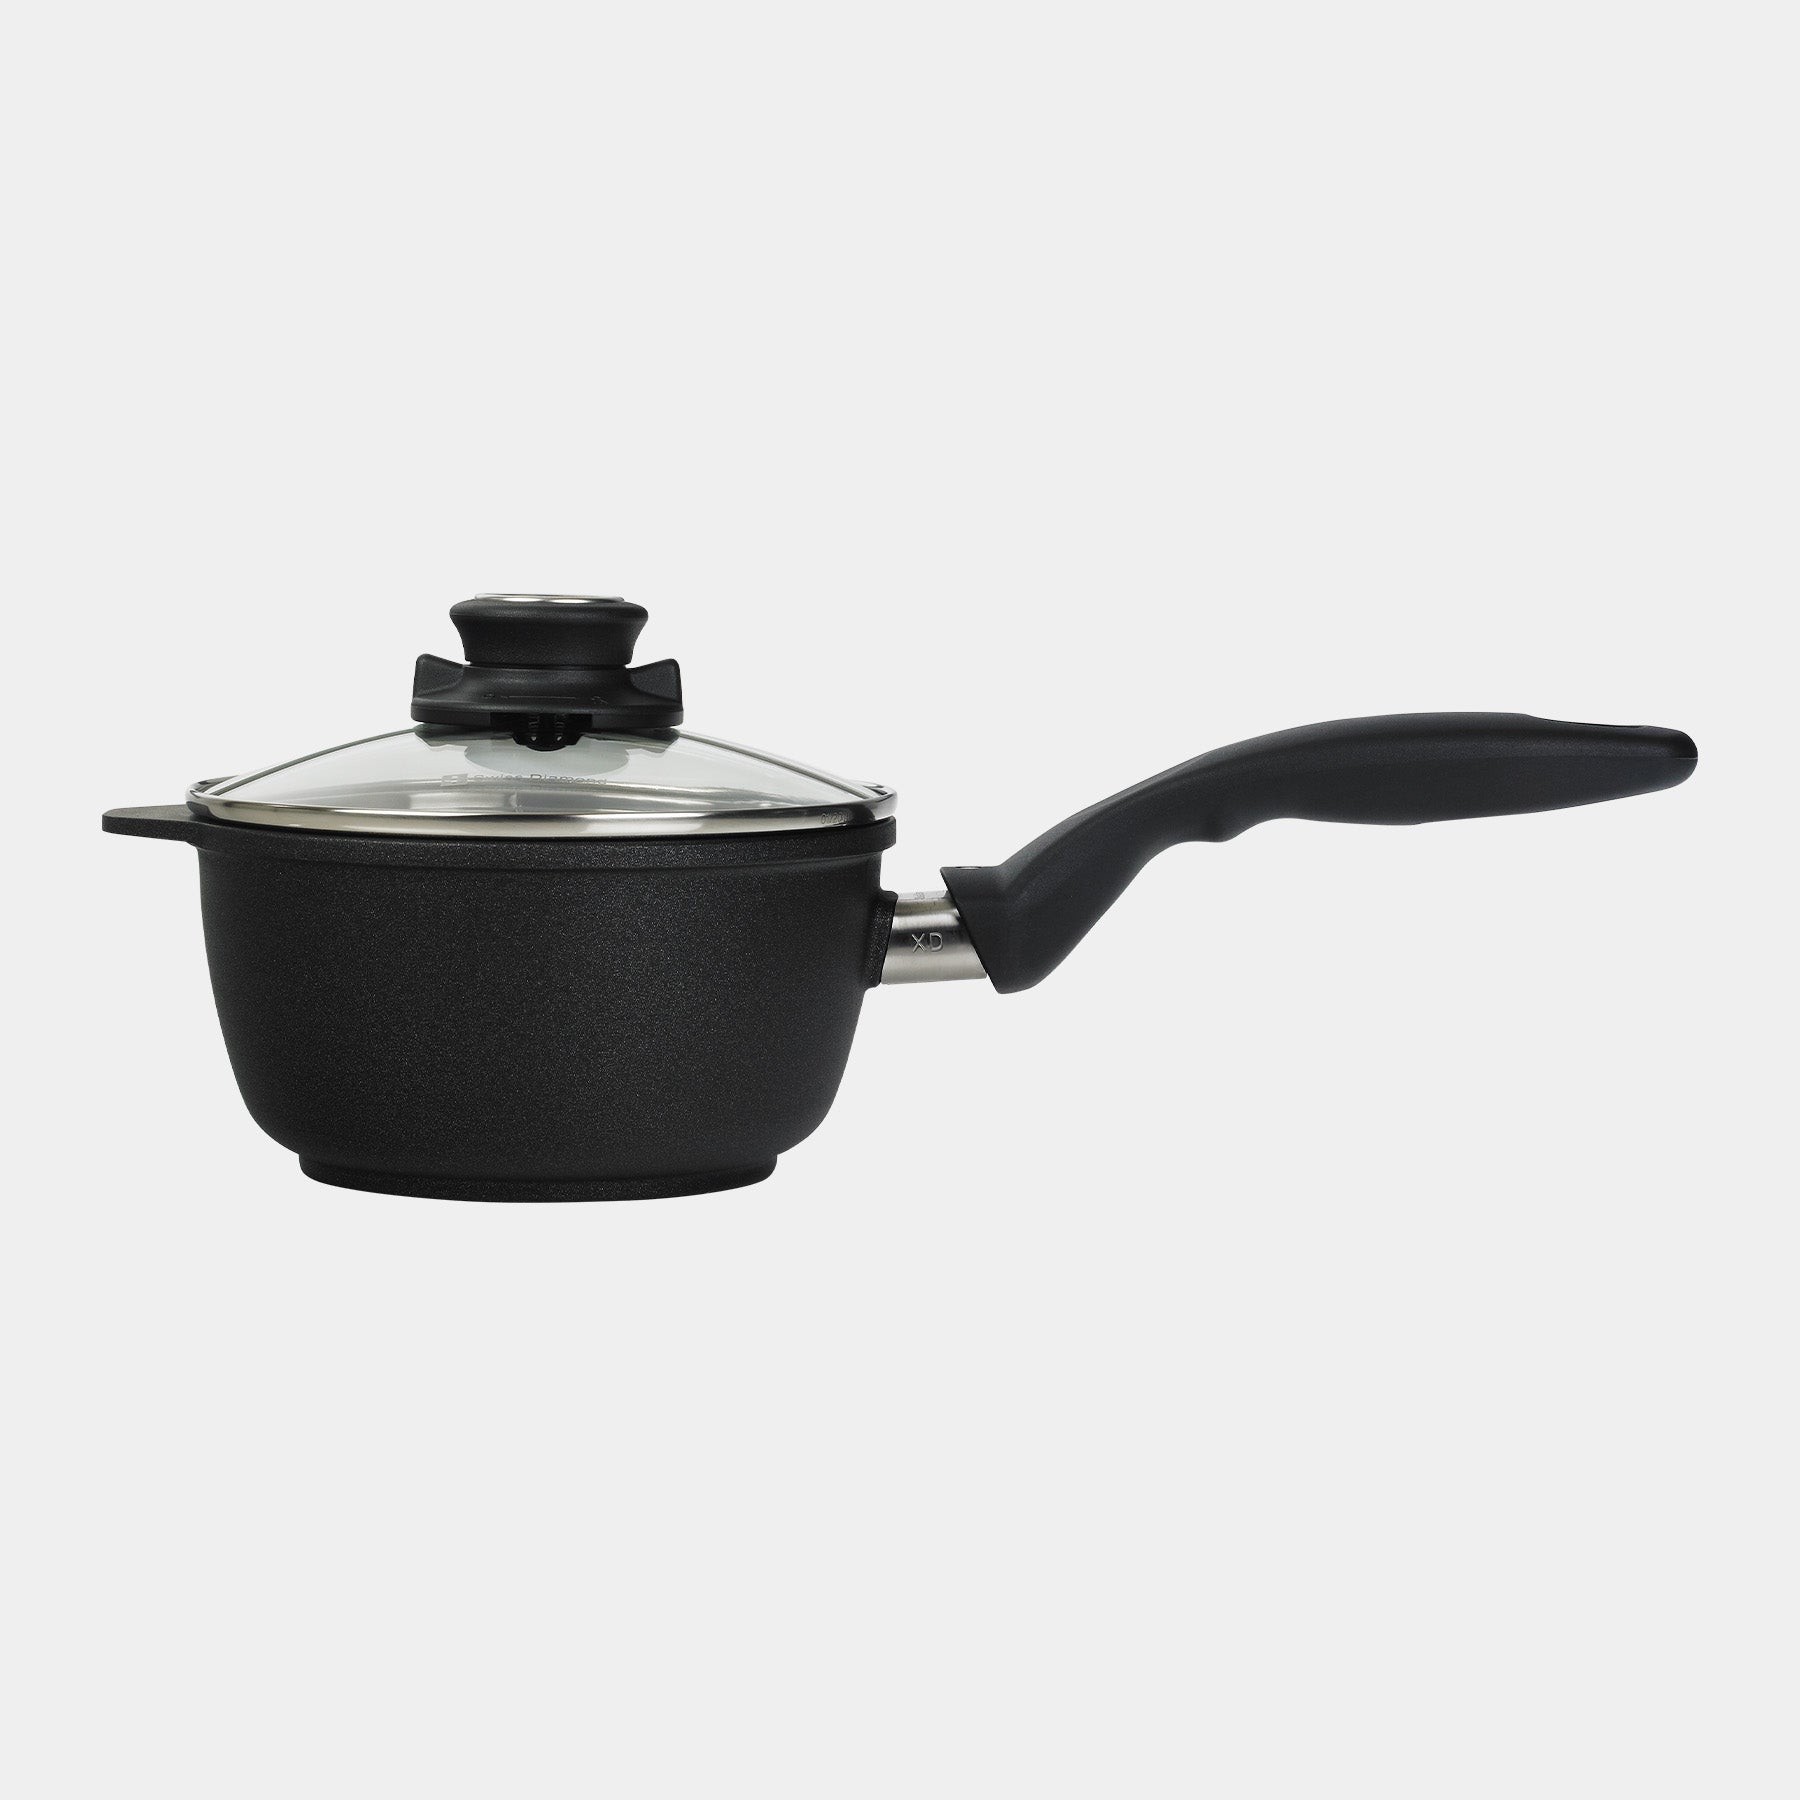 XD Nonstick 1.4 qt Saucepan with Glass Lid - Side View